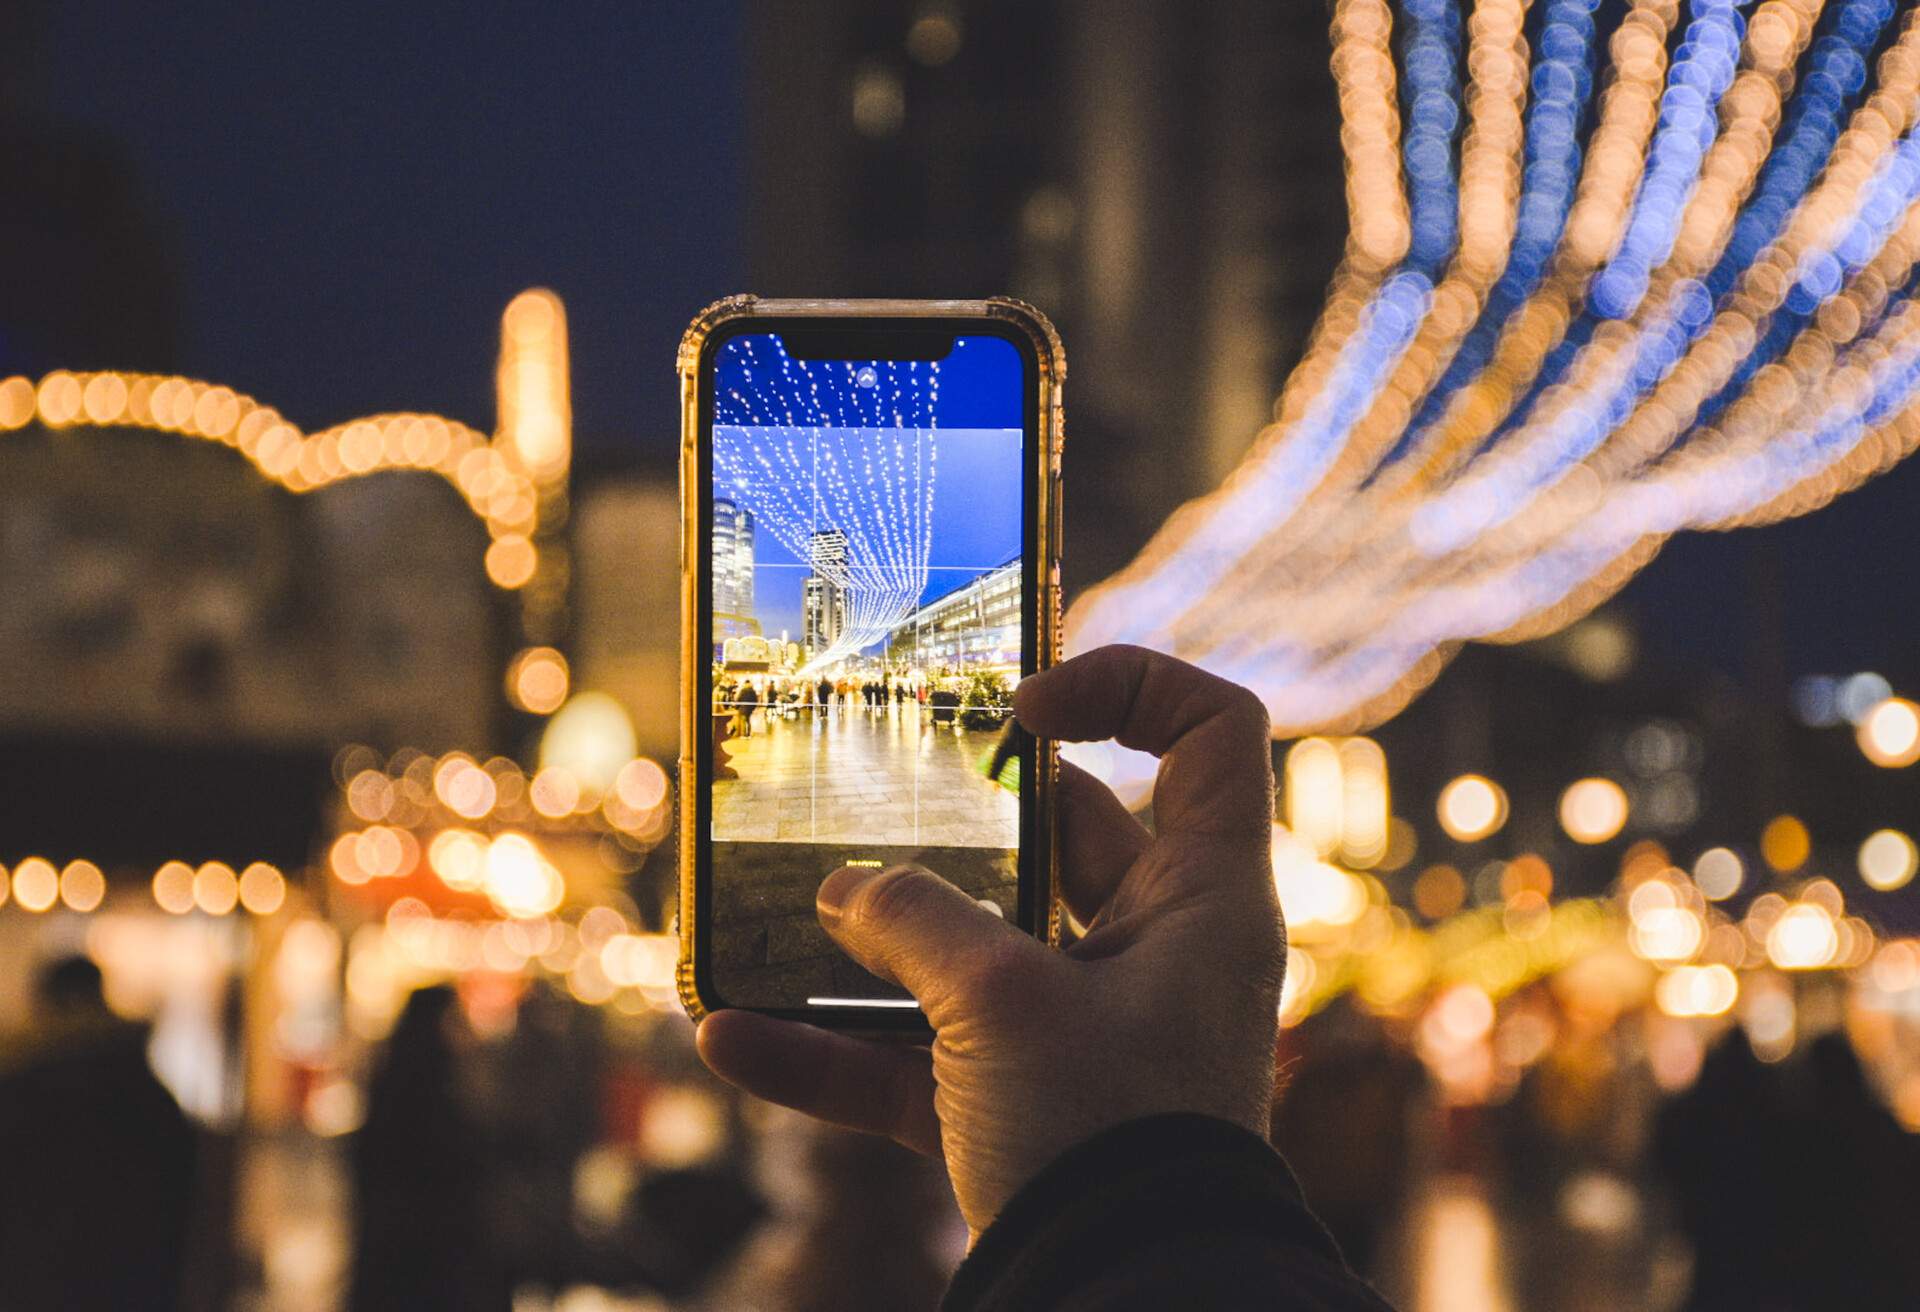 POV of man taking a photo of the Christmas lights and market in Berlin, Germany